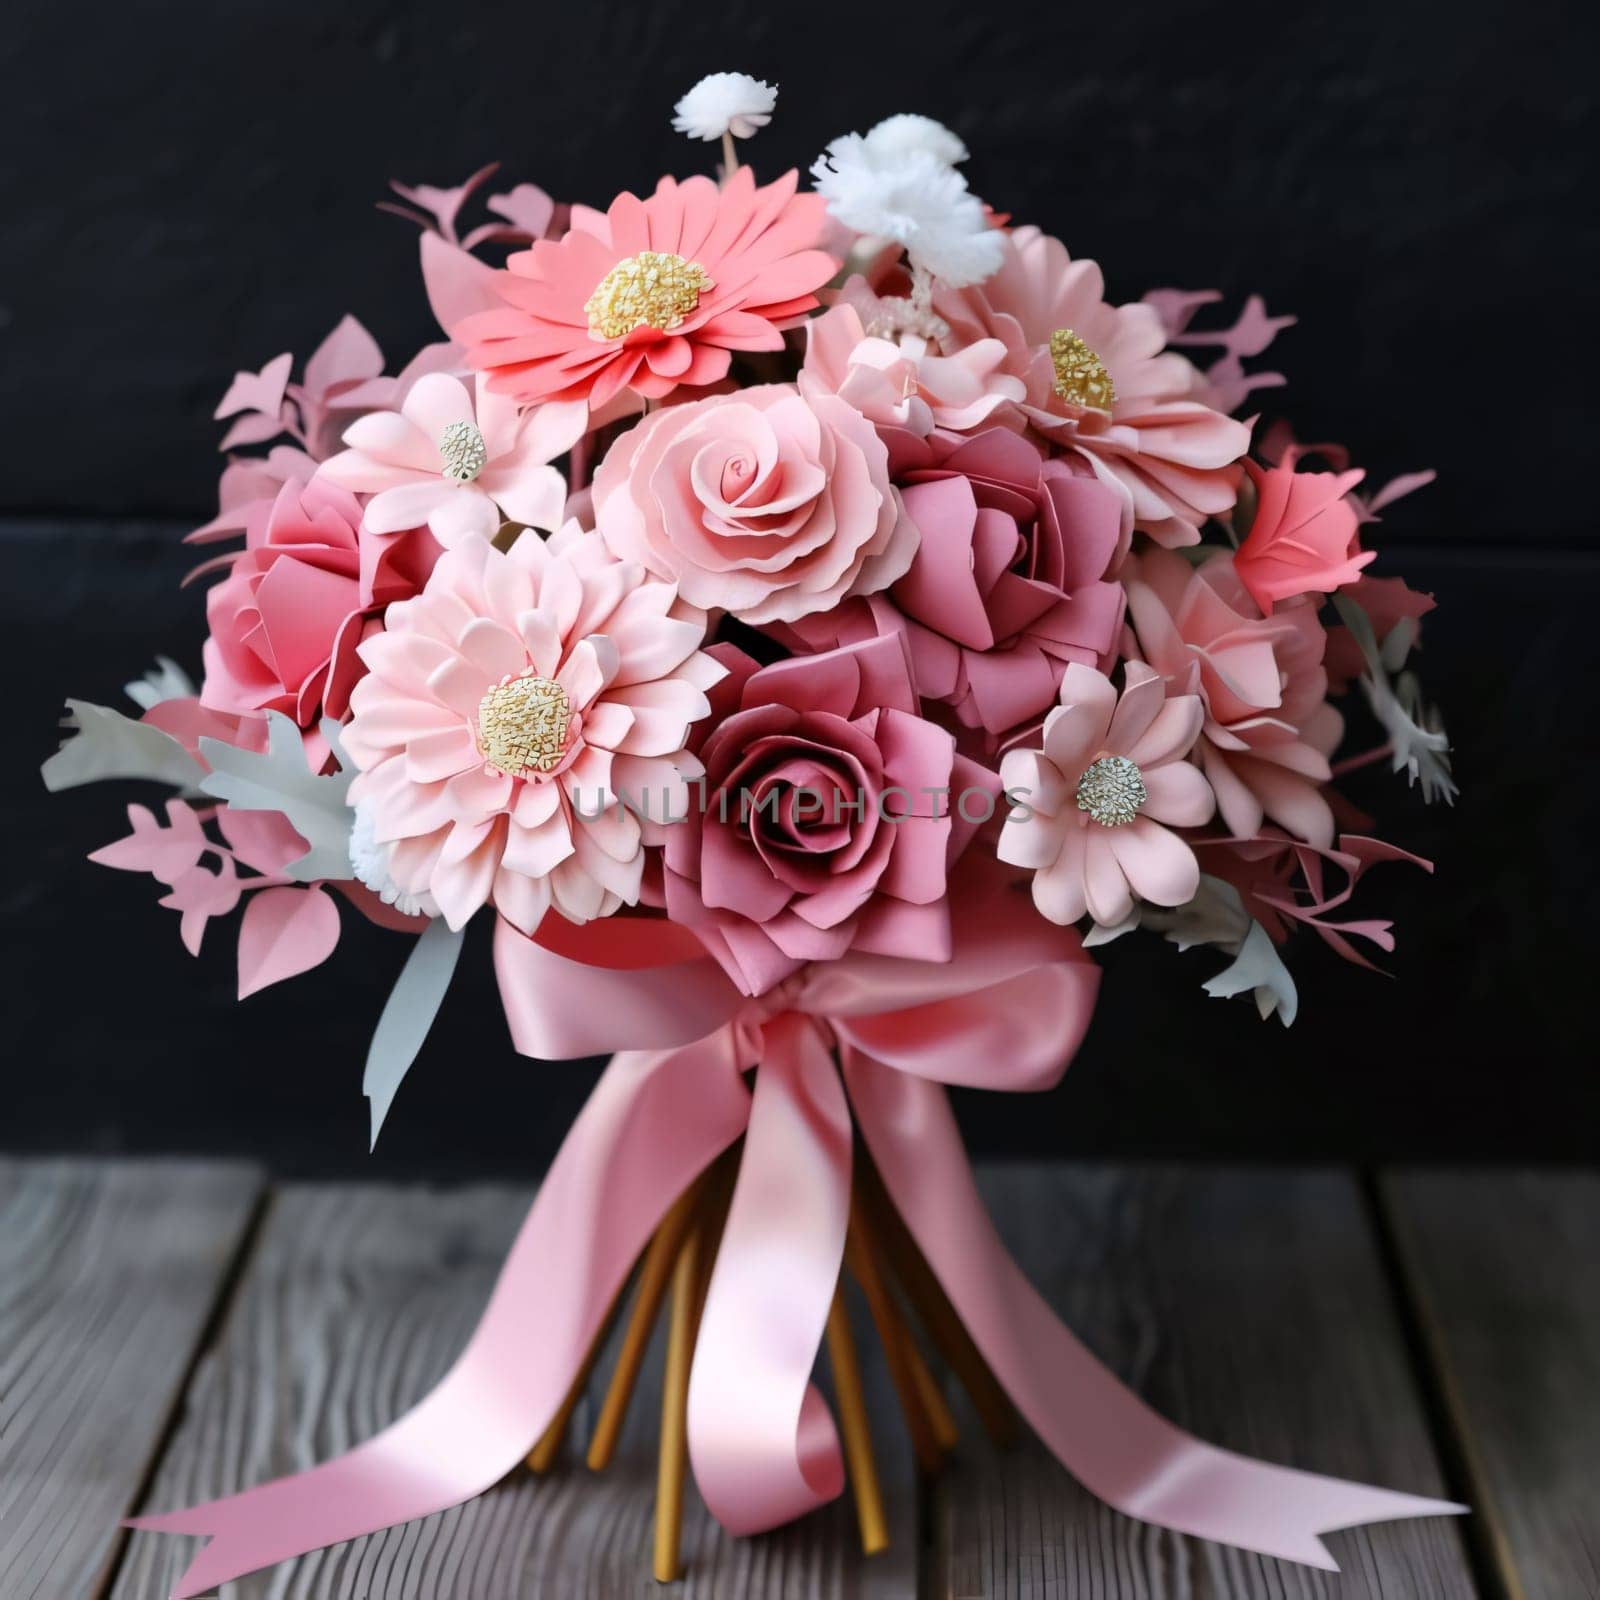 International Day of Education: Bouquet of pink and white flowers in a vase on a black background